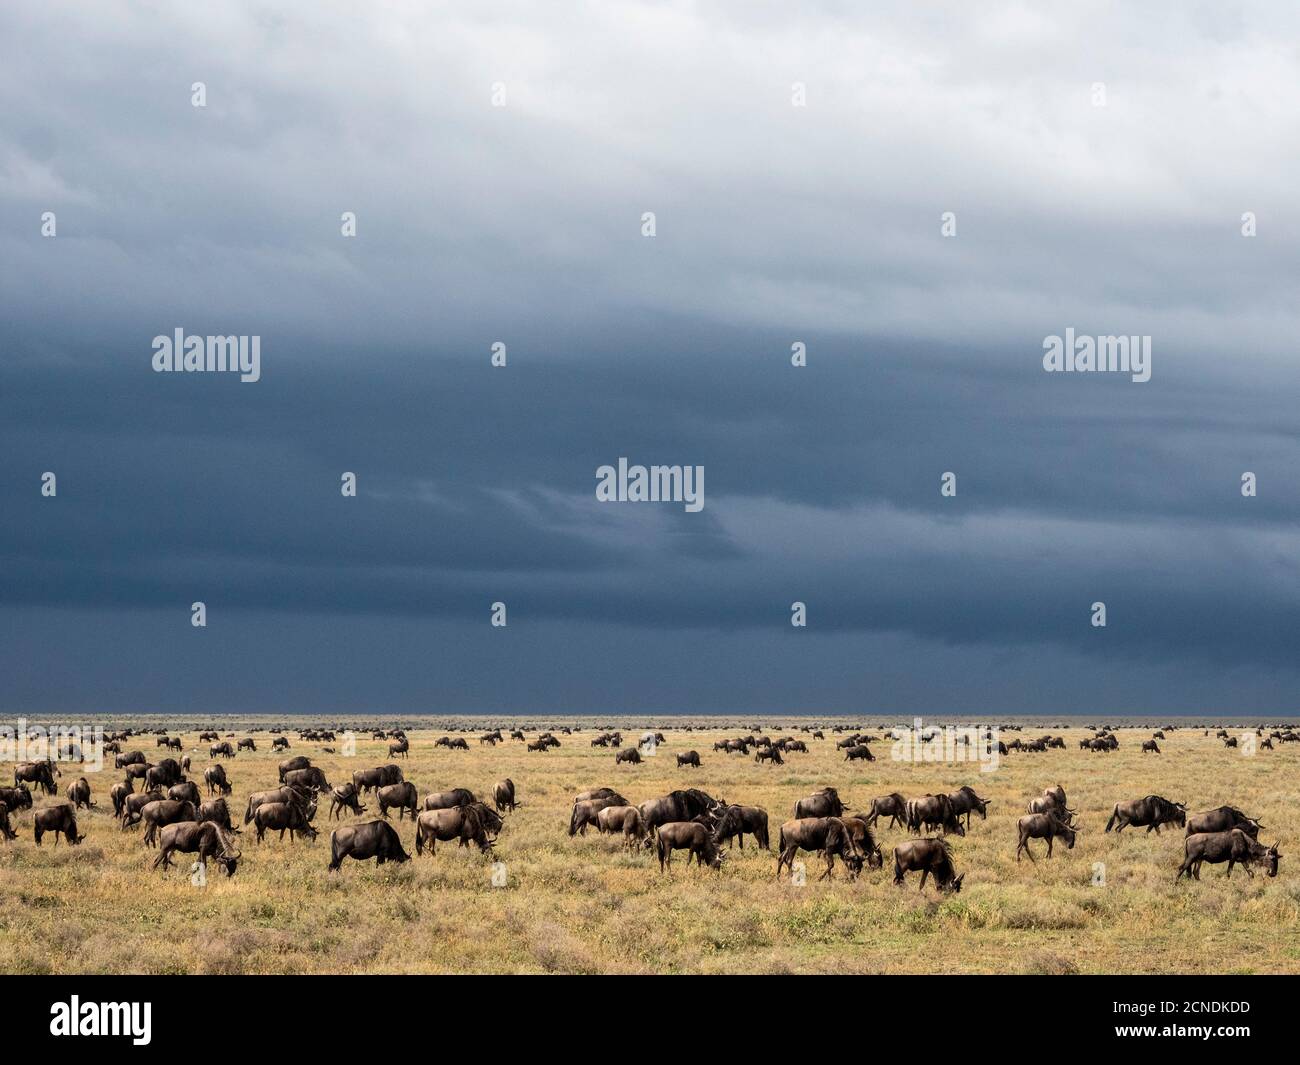 A confusion of blue wildebeest (Connochaetes taurinus), on the Great Migration, Serengeti National Park, Tanzania, East Africa, Africa Stock Photo